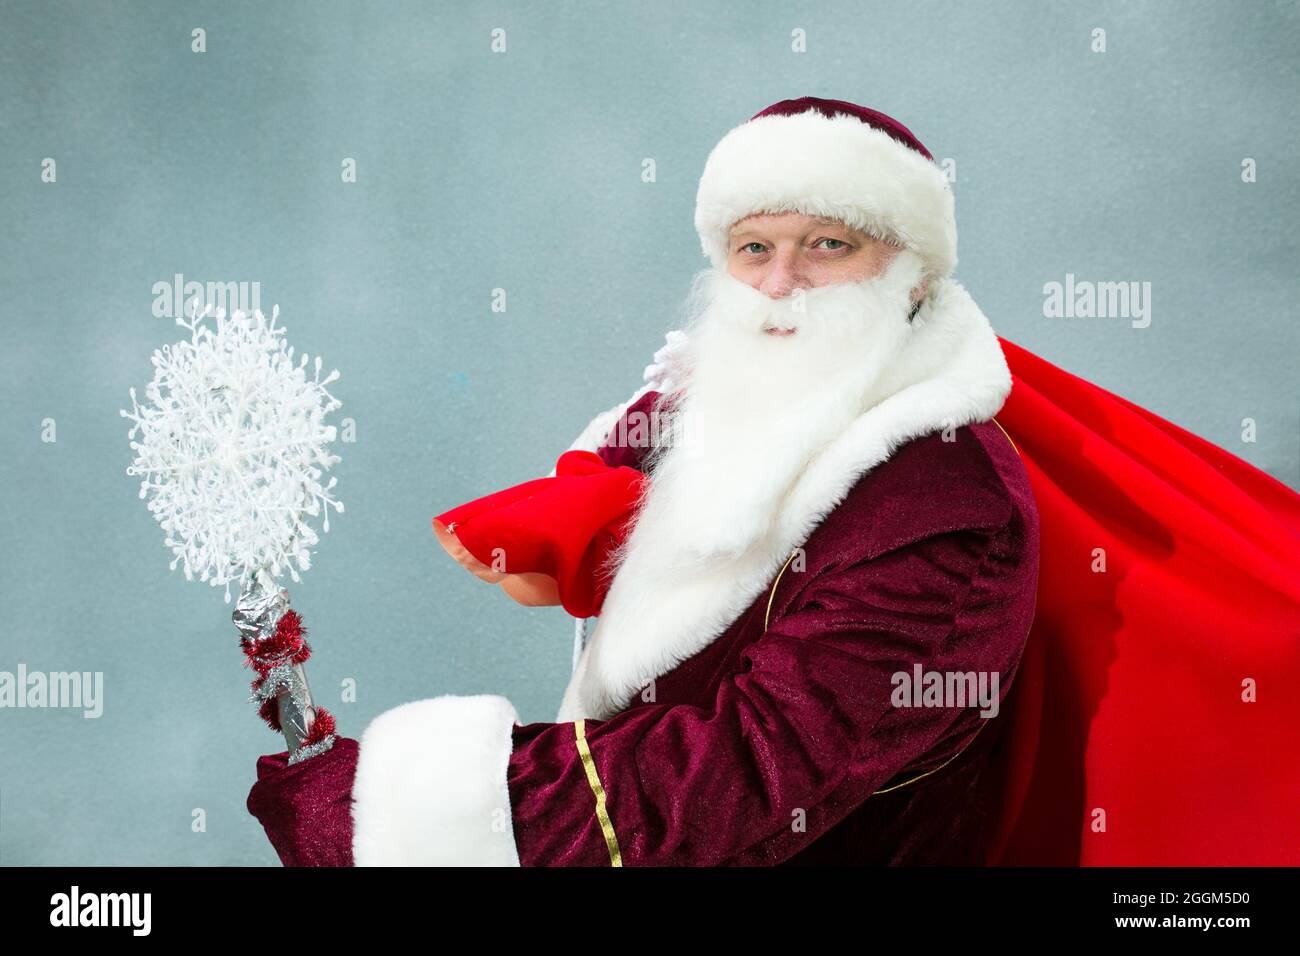 Portrait of Santa Claus on a gray background. Santa Claus holds a beautiful staff in his hand. Stock Photo